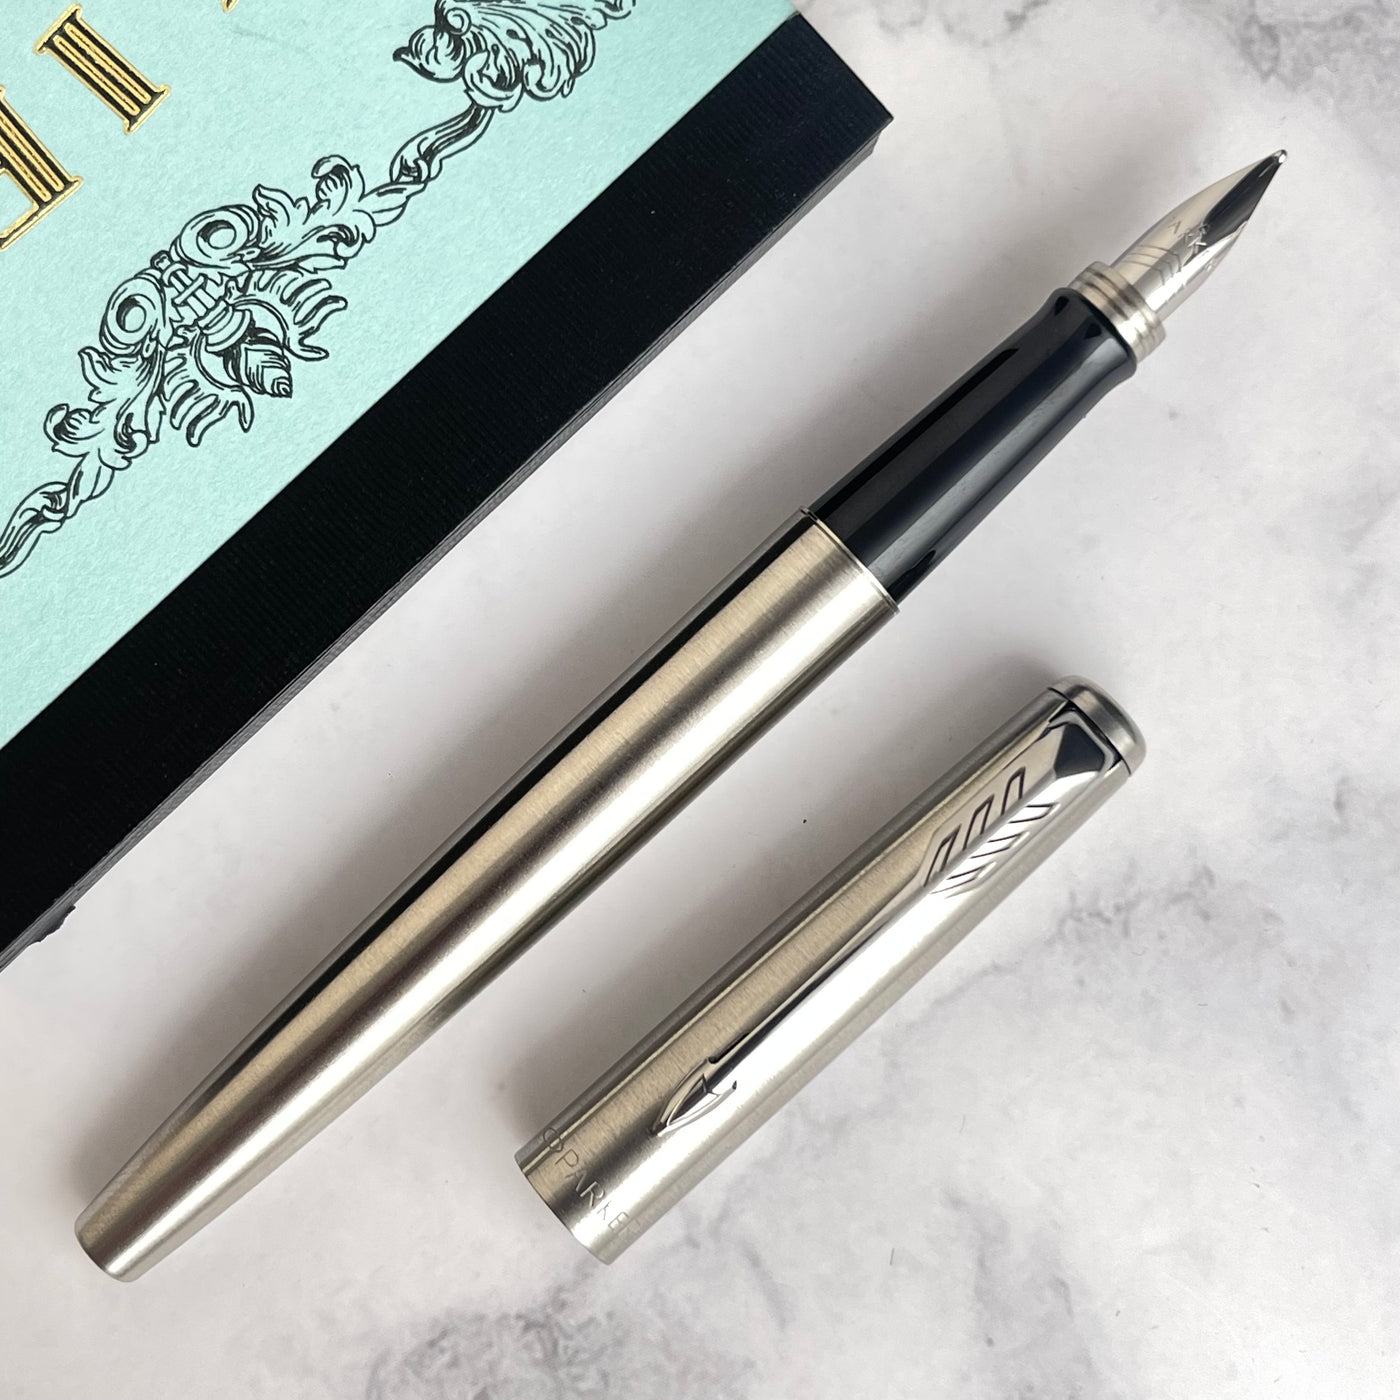 Parker Jotter Fountain Pen - Stainless Steel with Chrome Trim